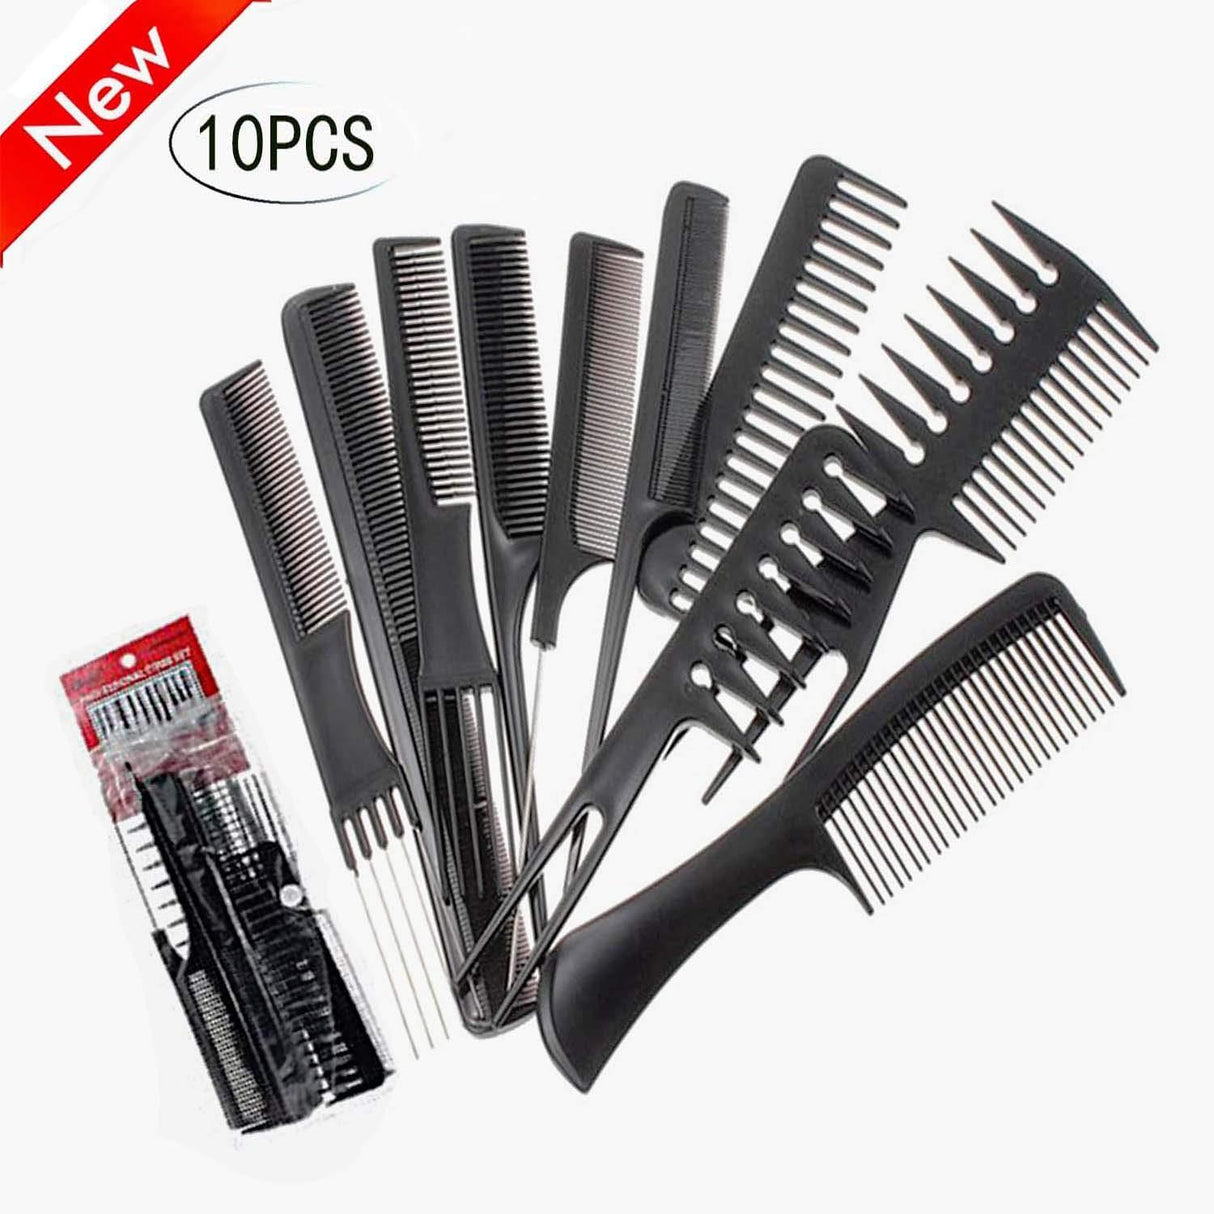 Anti-Static Comb Wide Tooth Set for Curly Hair for Girls or Ladies